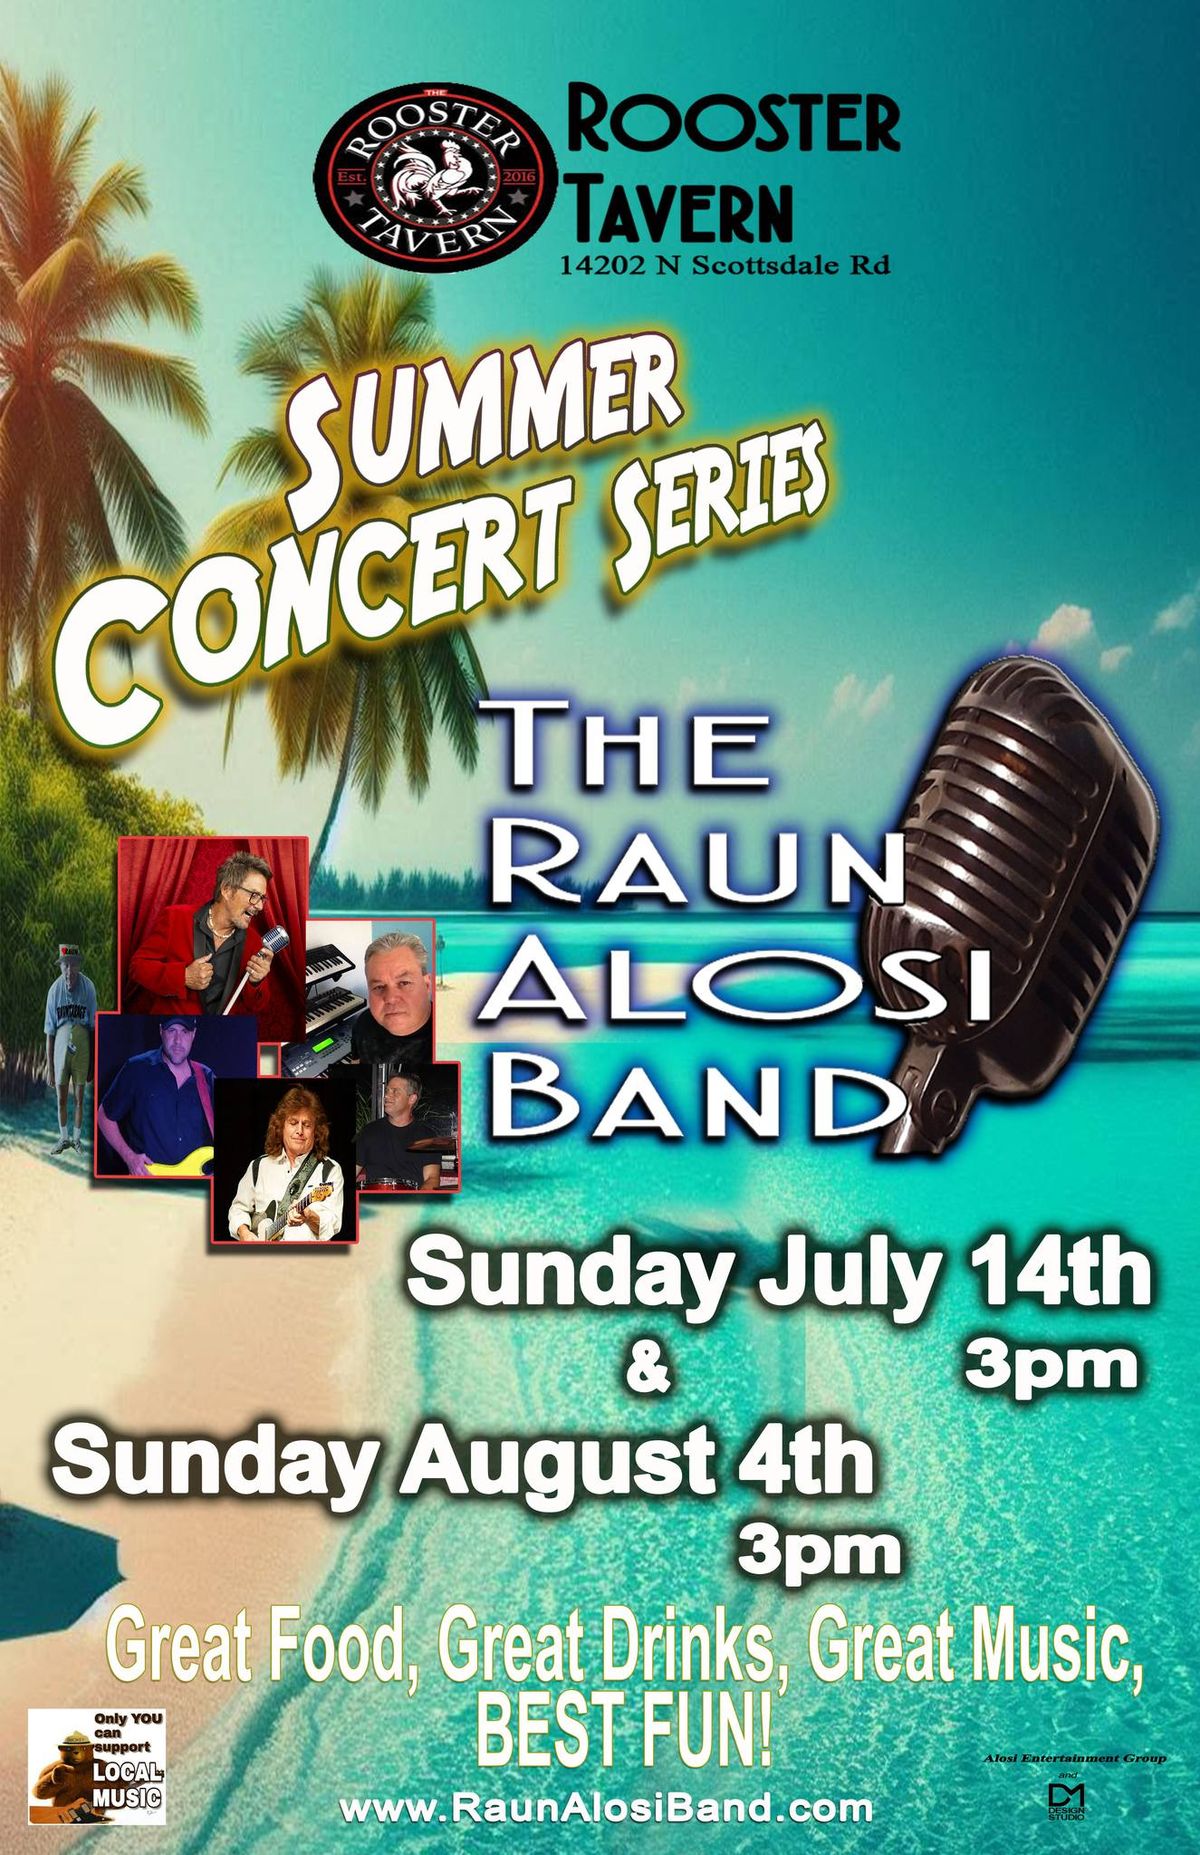 Sunday Summer Concert Series at The Rooster Tavern